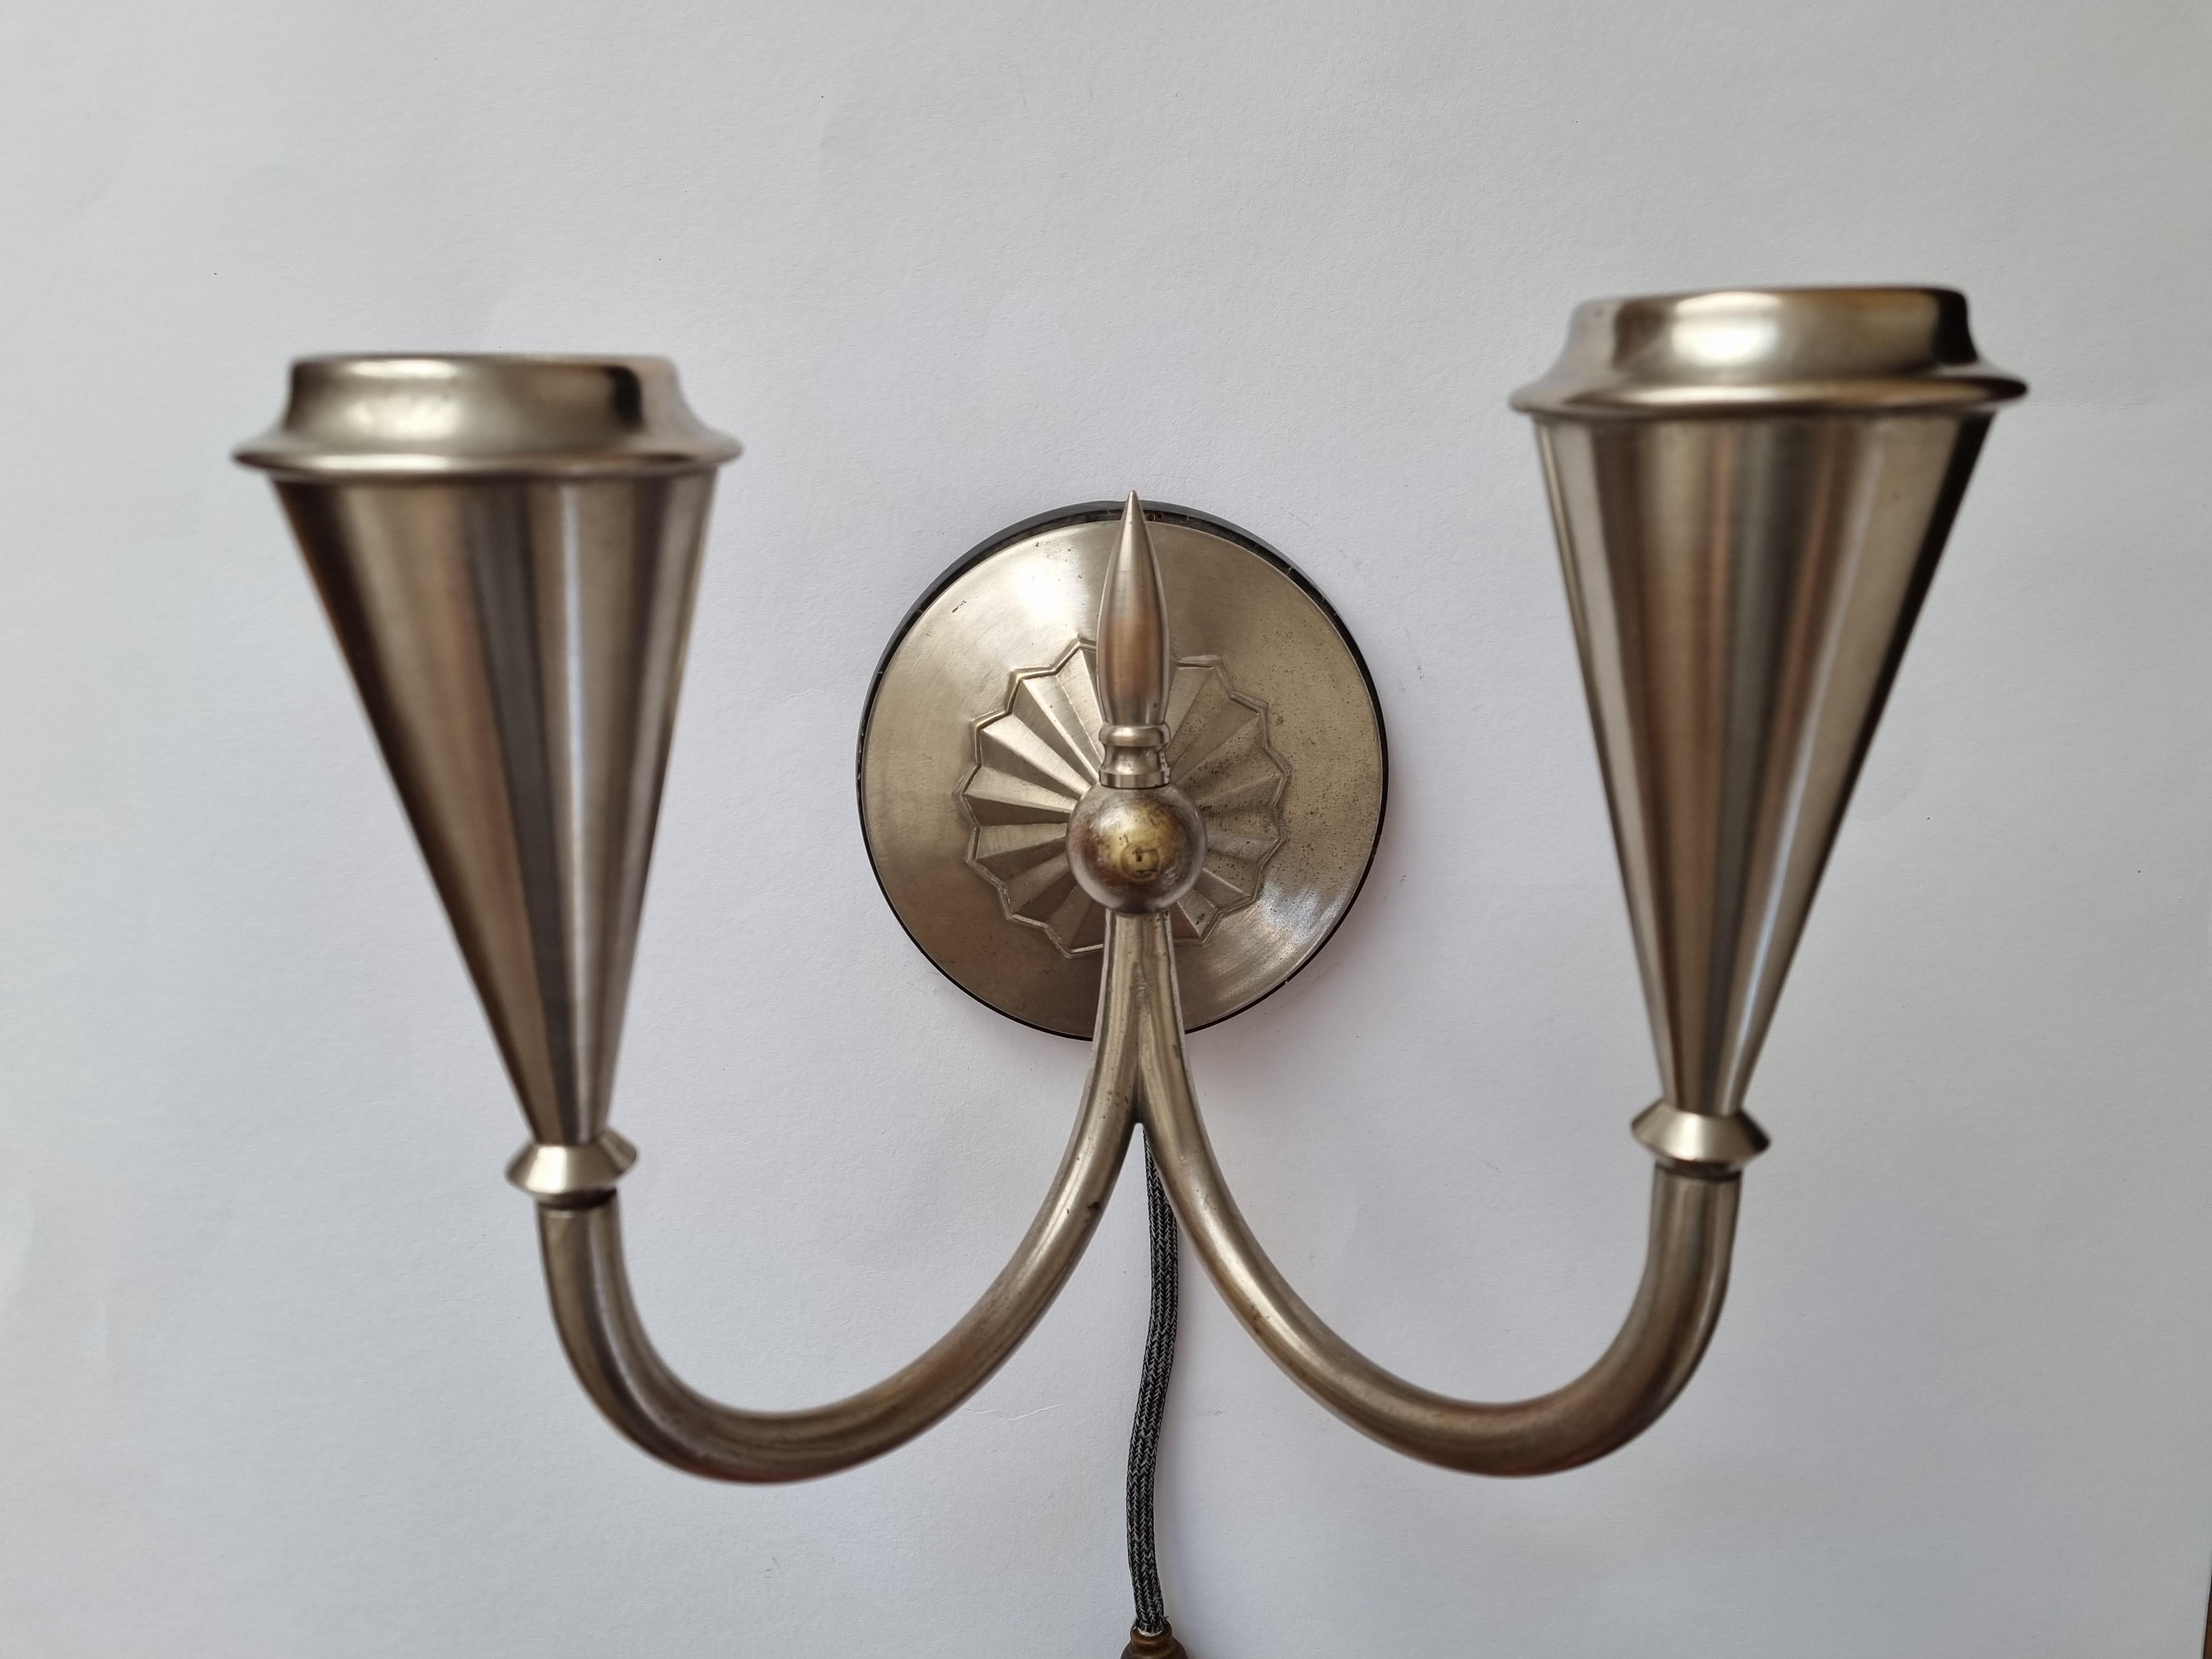 Early 20th Century Rare Art Deco Wall Lamp Franta Anyz, 1930s For Sale